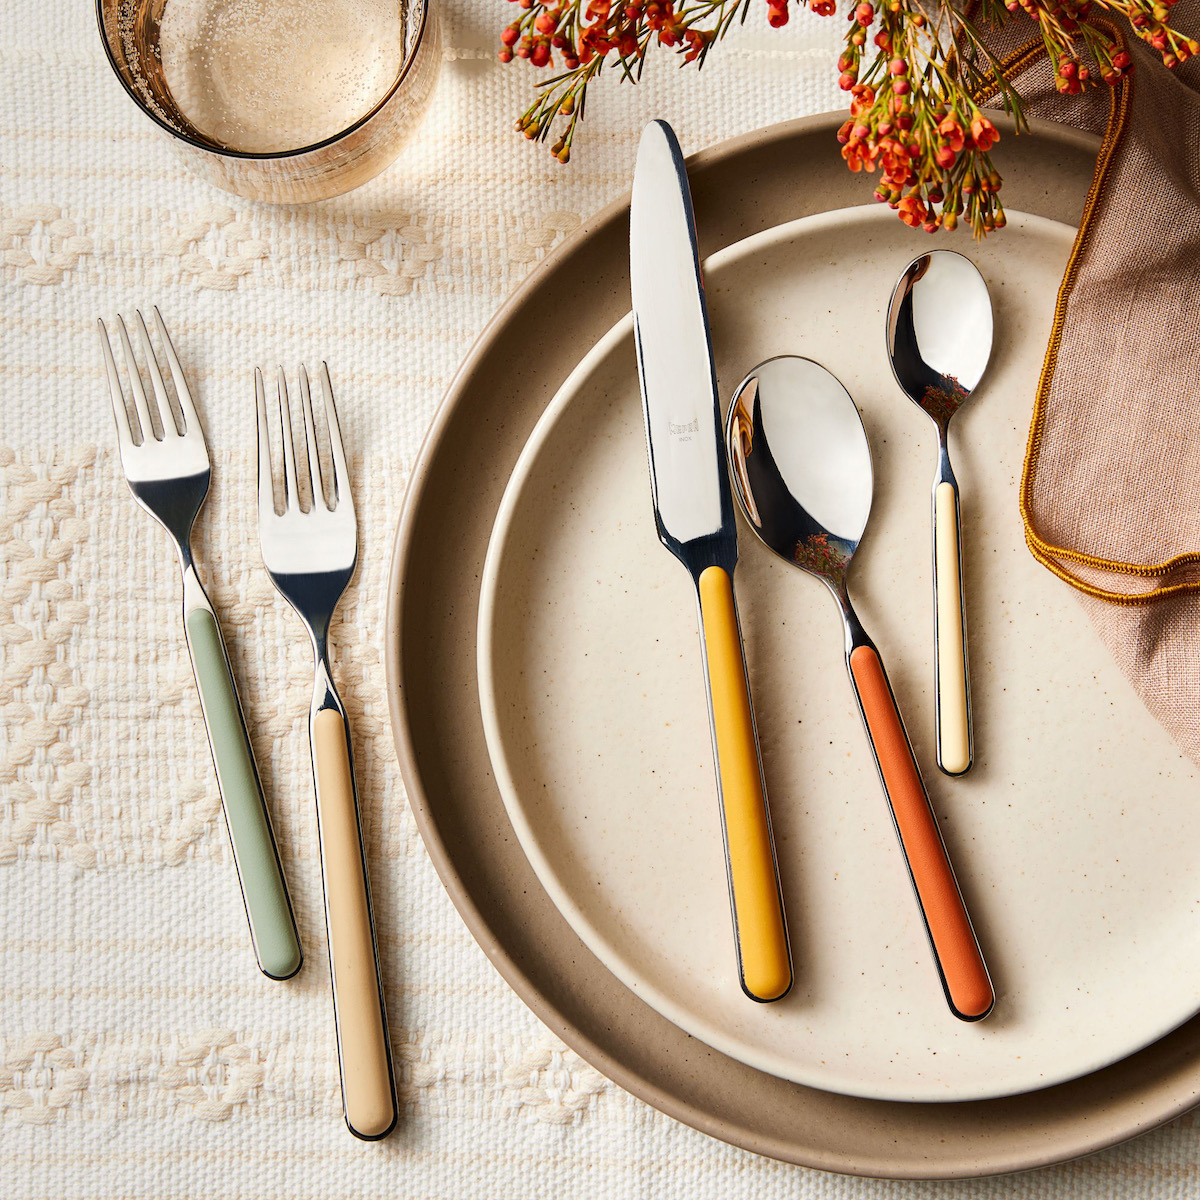 Two forks, a knife, and two spoons with multicolored handles staged over a ceramic ware plate 